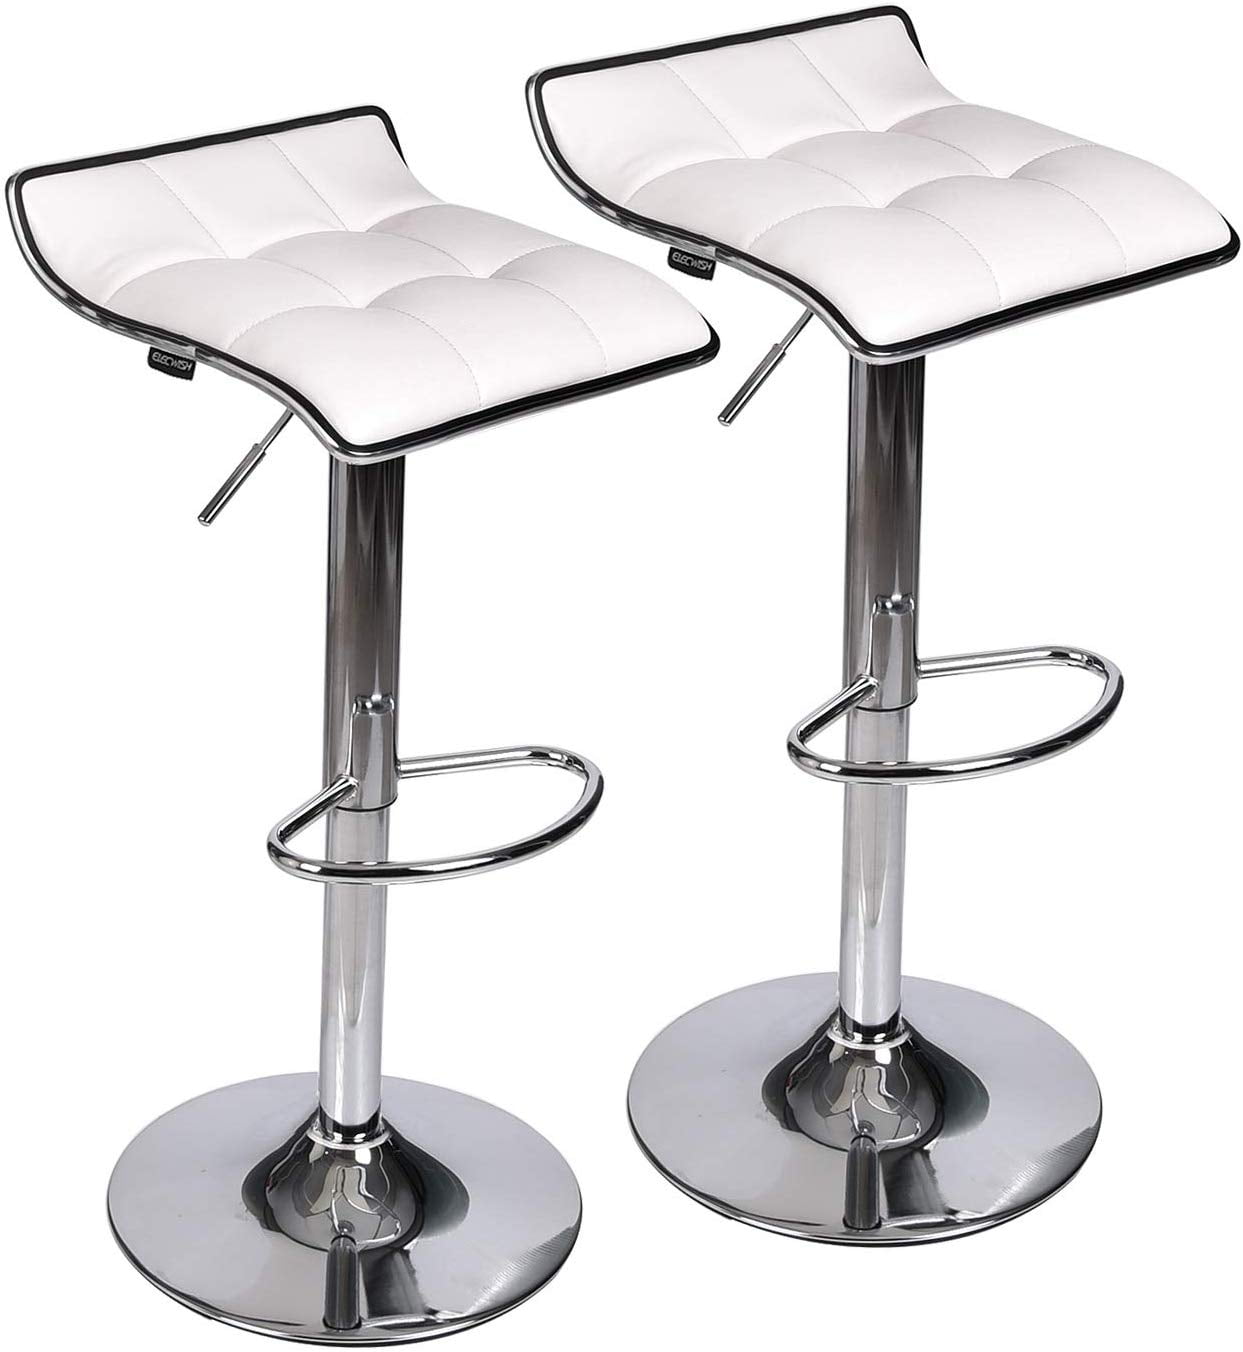 Modern Swivel Adjustable Home Barstools-Set of 2 for Kicthen Counter Backless Pu Leather Fabric Counter Height Airlift Home Bar Furniture Stool Chairs with Chrome Base Black